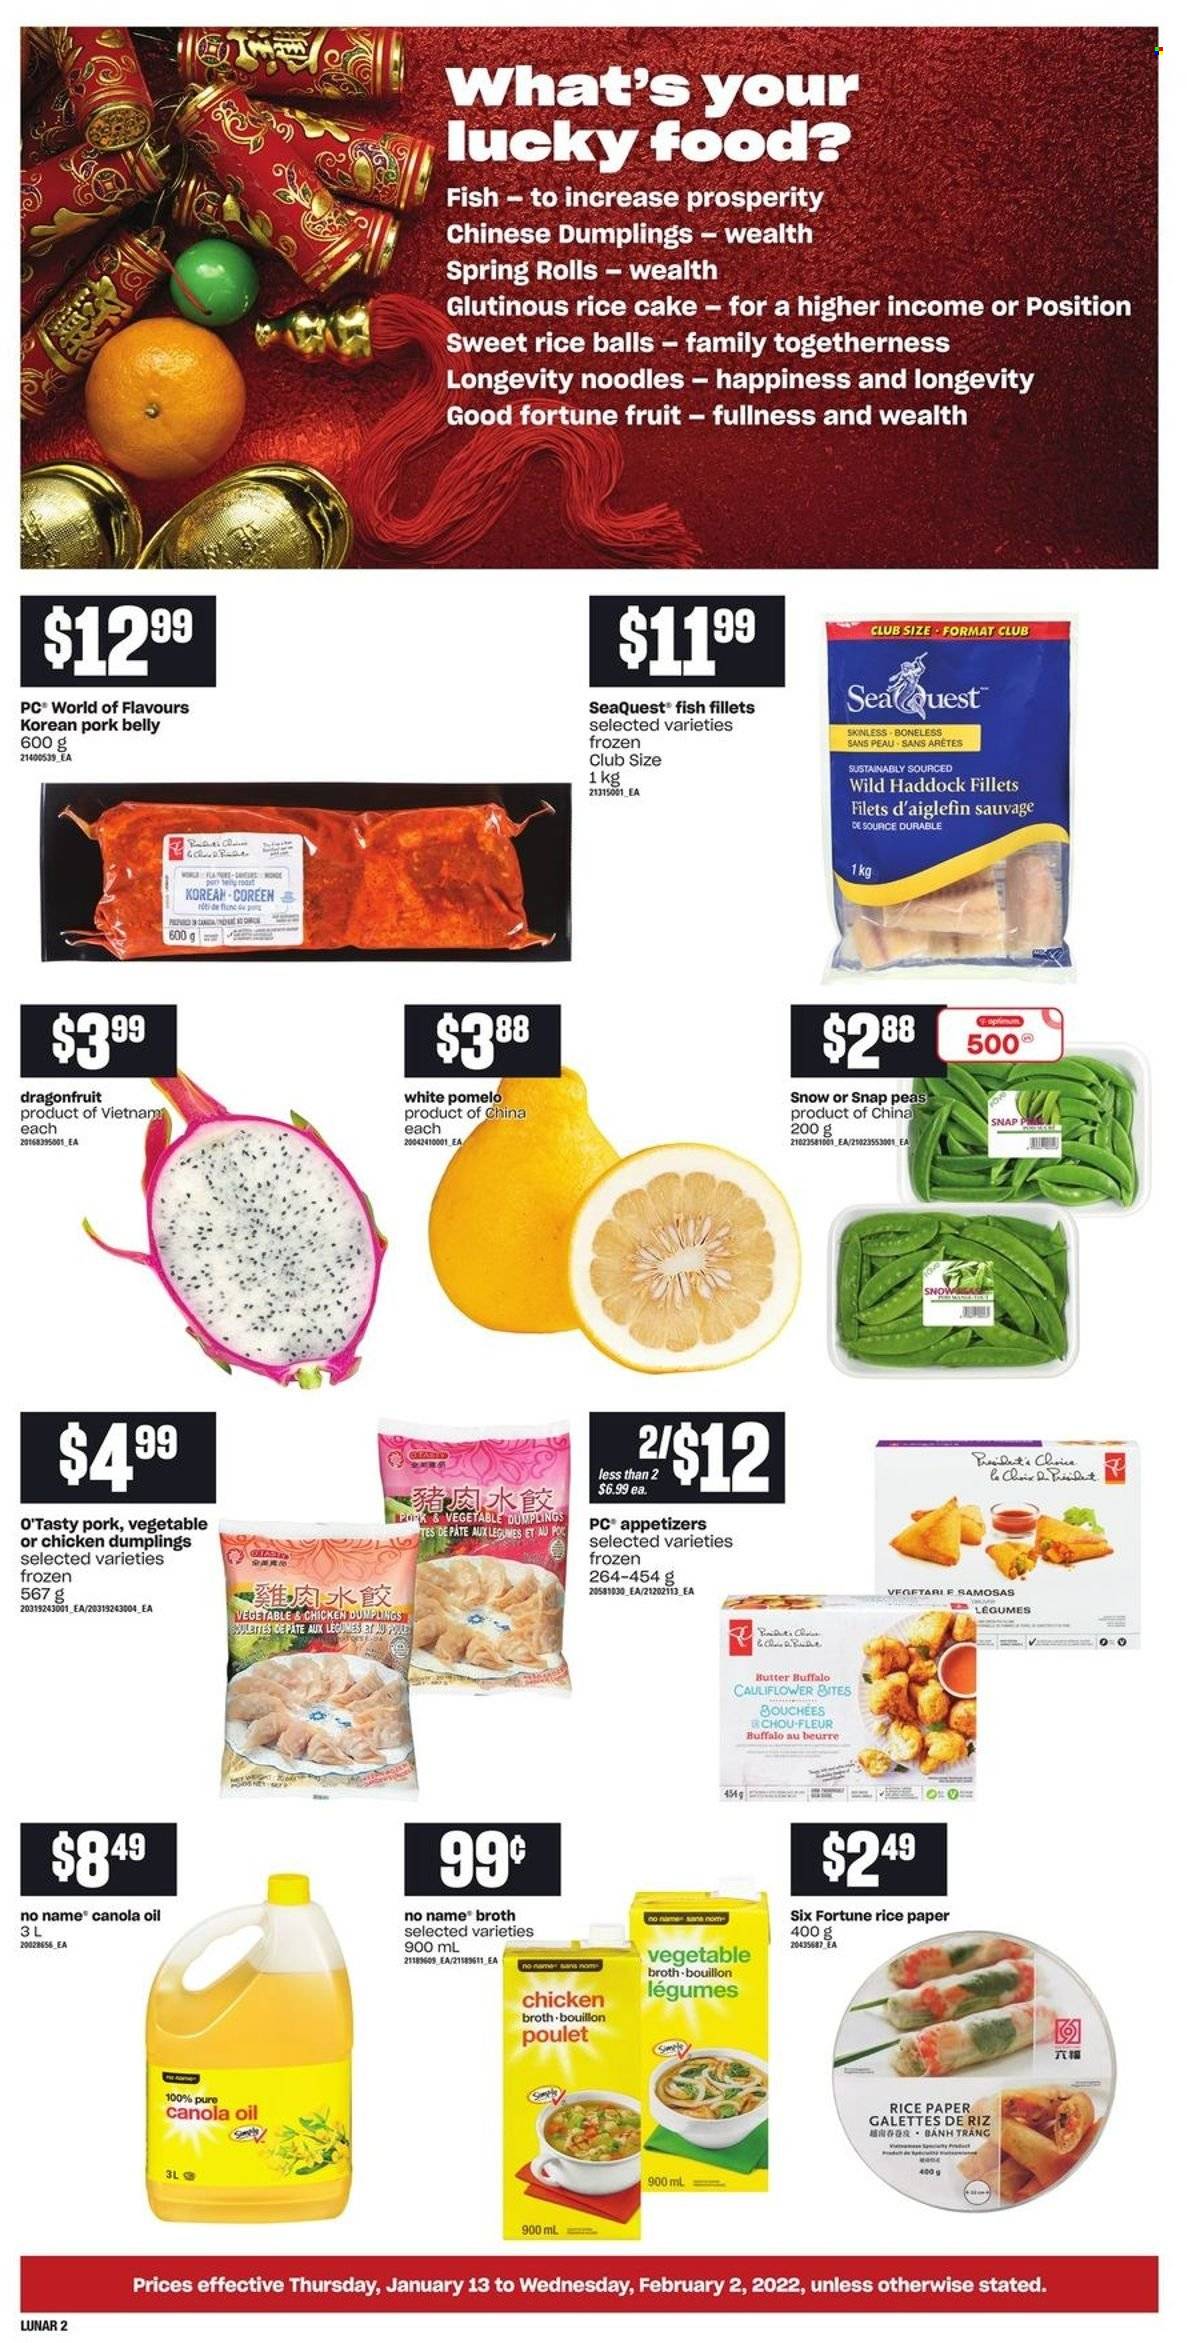 thumbnail - Atlantic Superstore Flyer - January 13, 2022 - February 02, 2022 - Sales products - cauliflower, peas, pomelo, fish fillets, haddock, fish, No Name, dumplings, spring rolls, noodles, butter, snap peas, rice balls, bouillon, chicken broth, broth, canola oil, oil, pork belly, pork meat. Page 2.